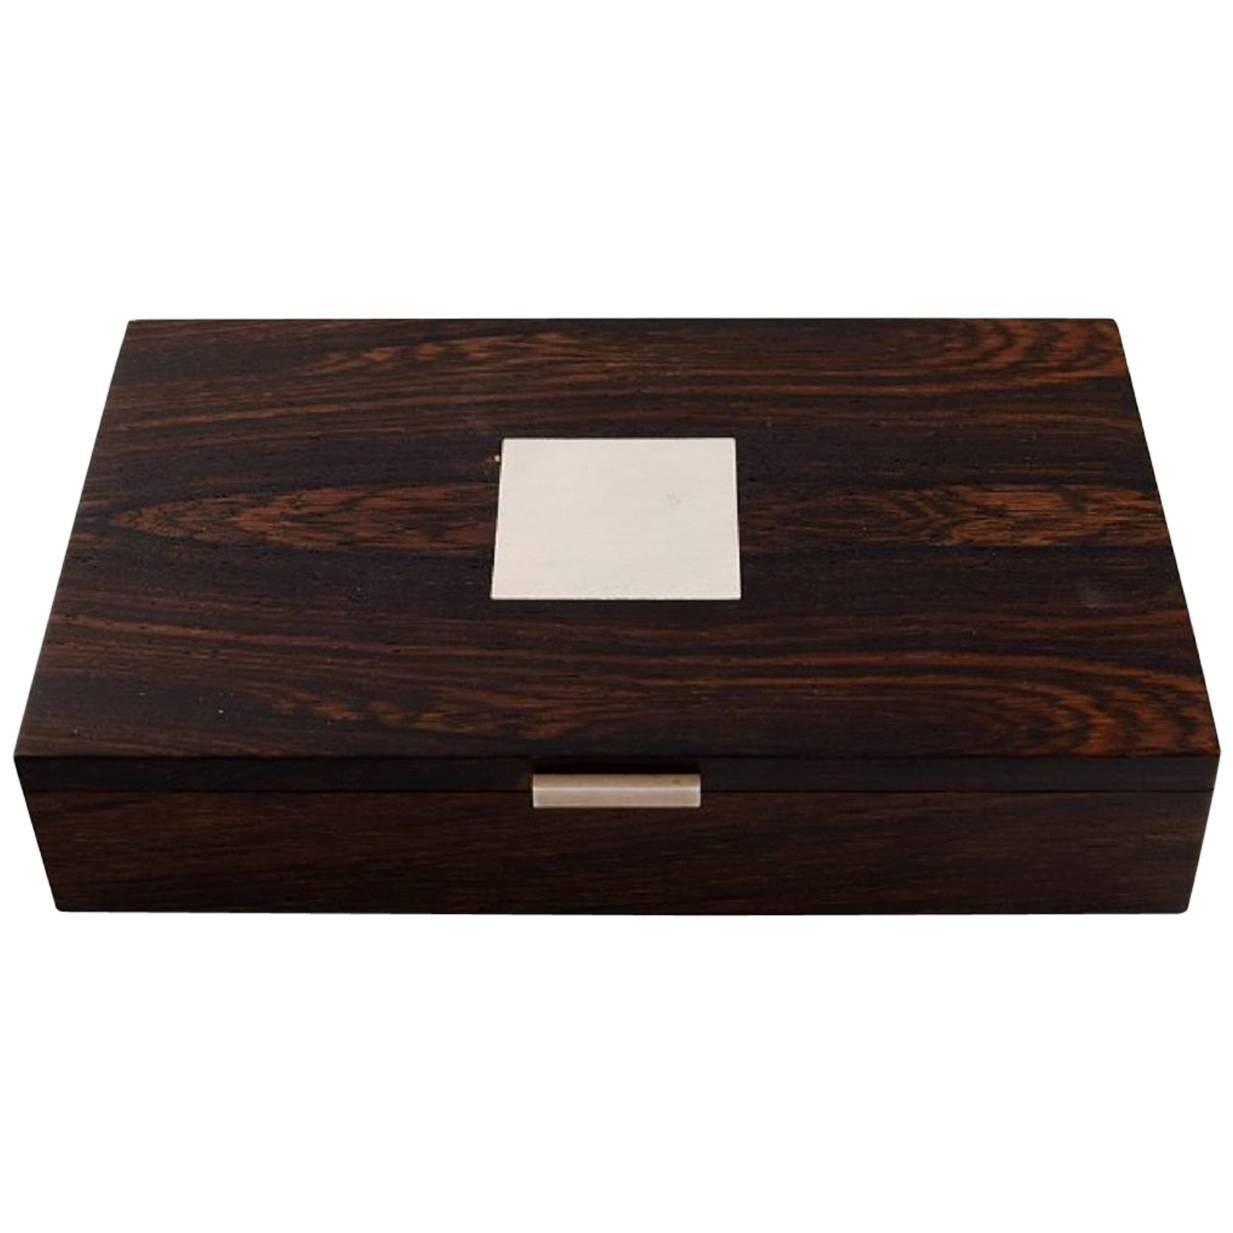 Hans Hansen, Casket / Box in Rosewood Inlaid with Silver